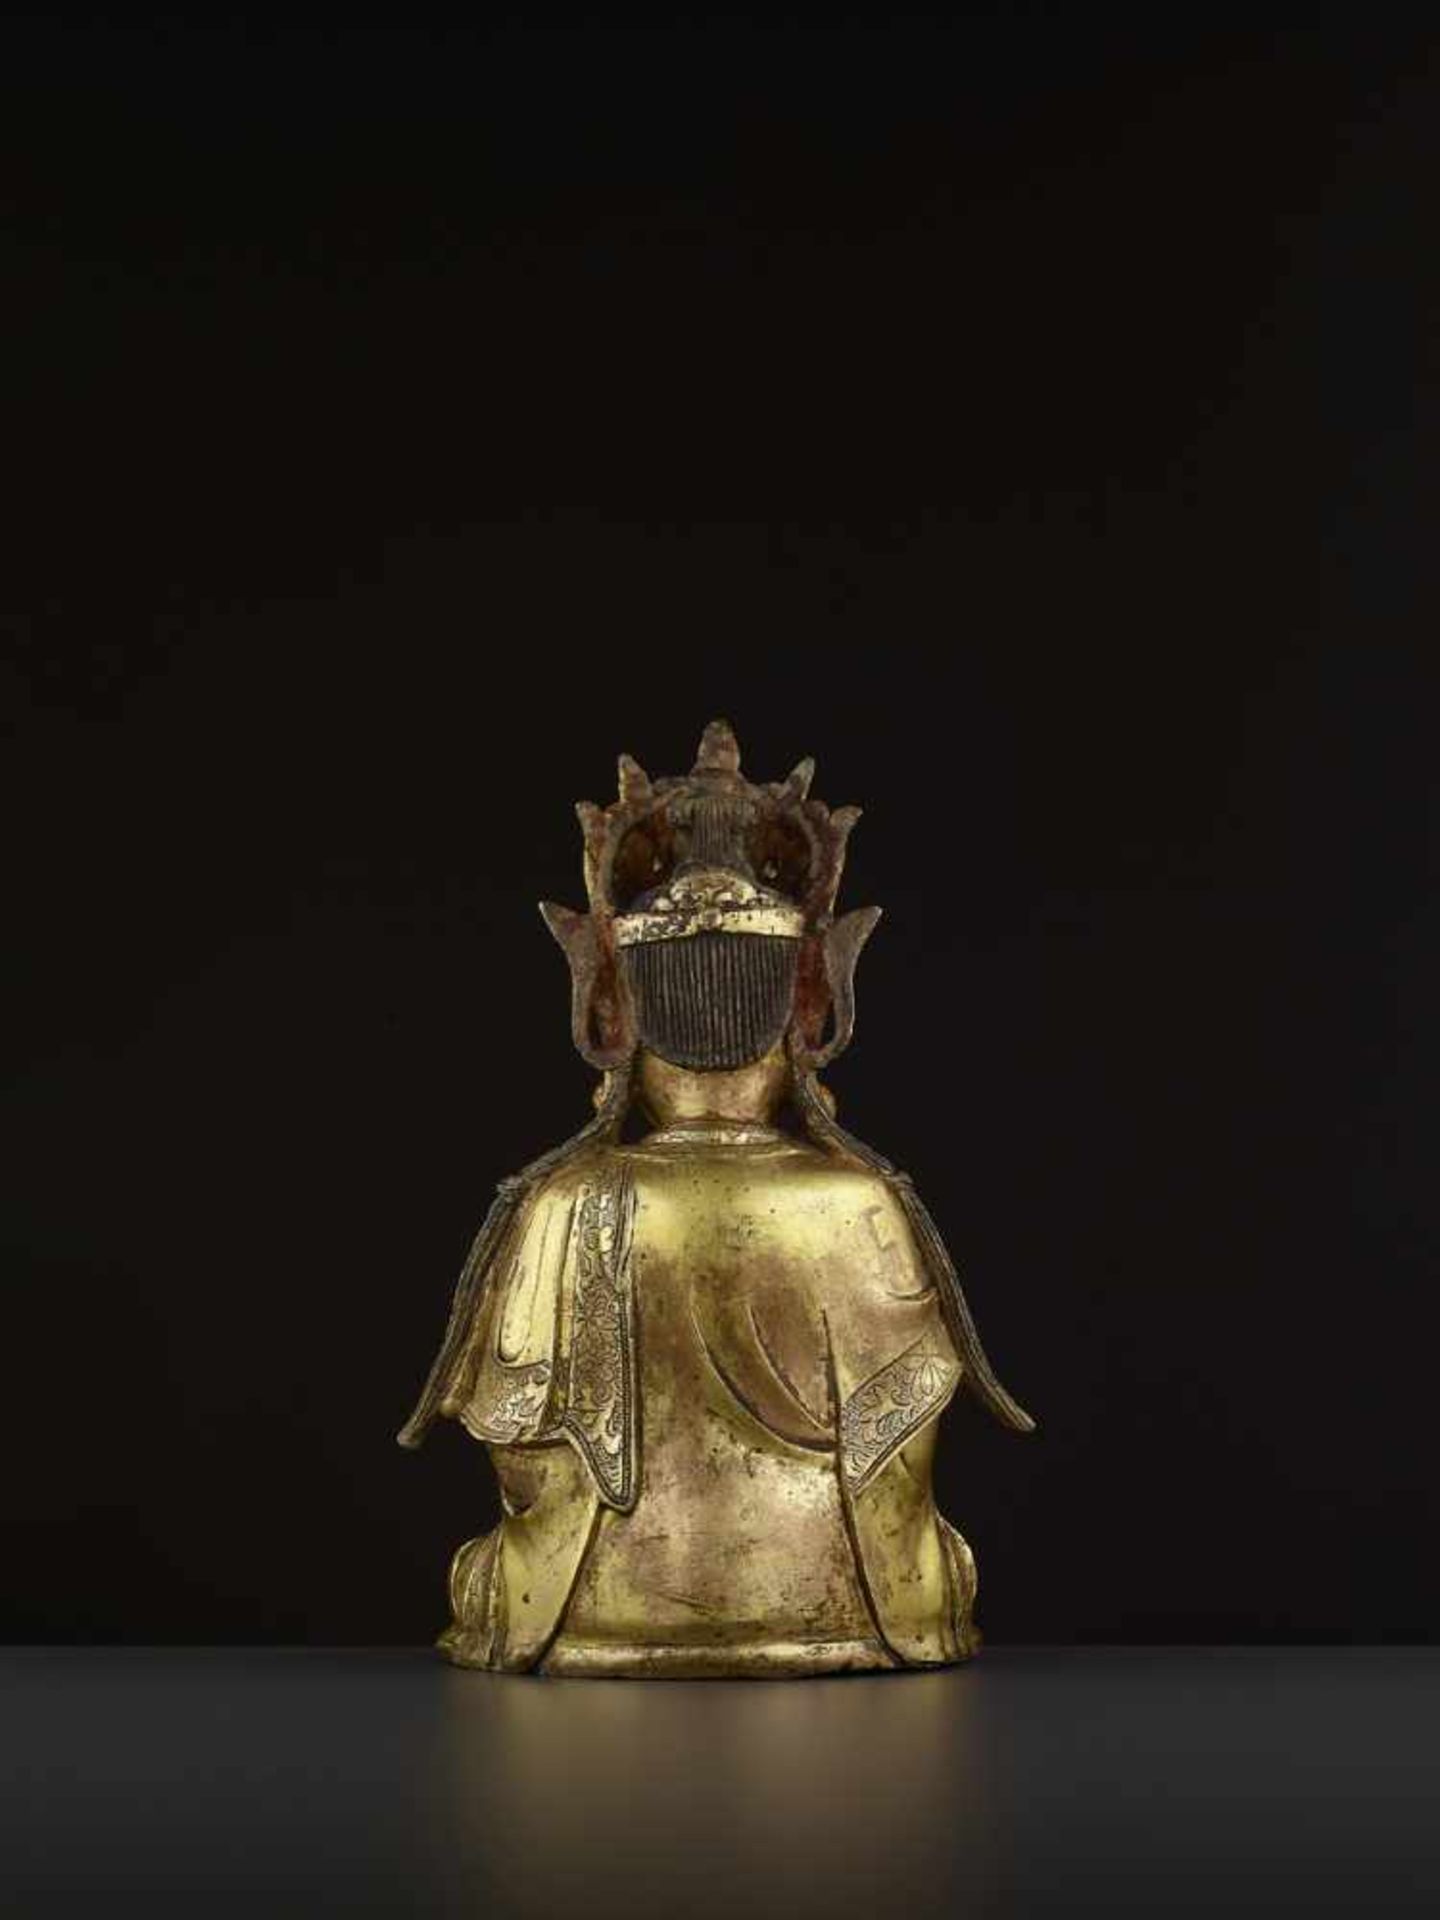 A FINELY CAST GILT-BRONZE FIGURE OF GUANYIN, MING DYNASTY China, 16th-17th century. The figure is - Image 6 of 10